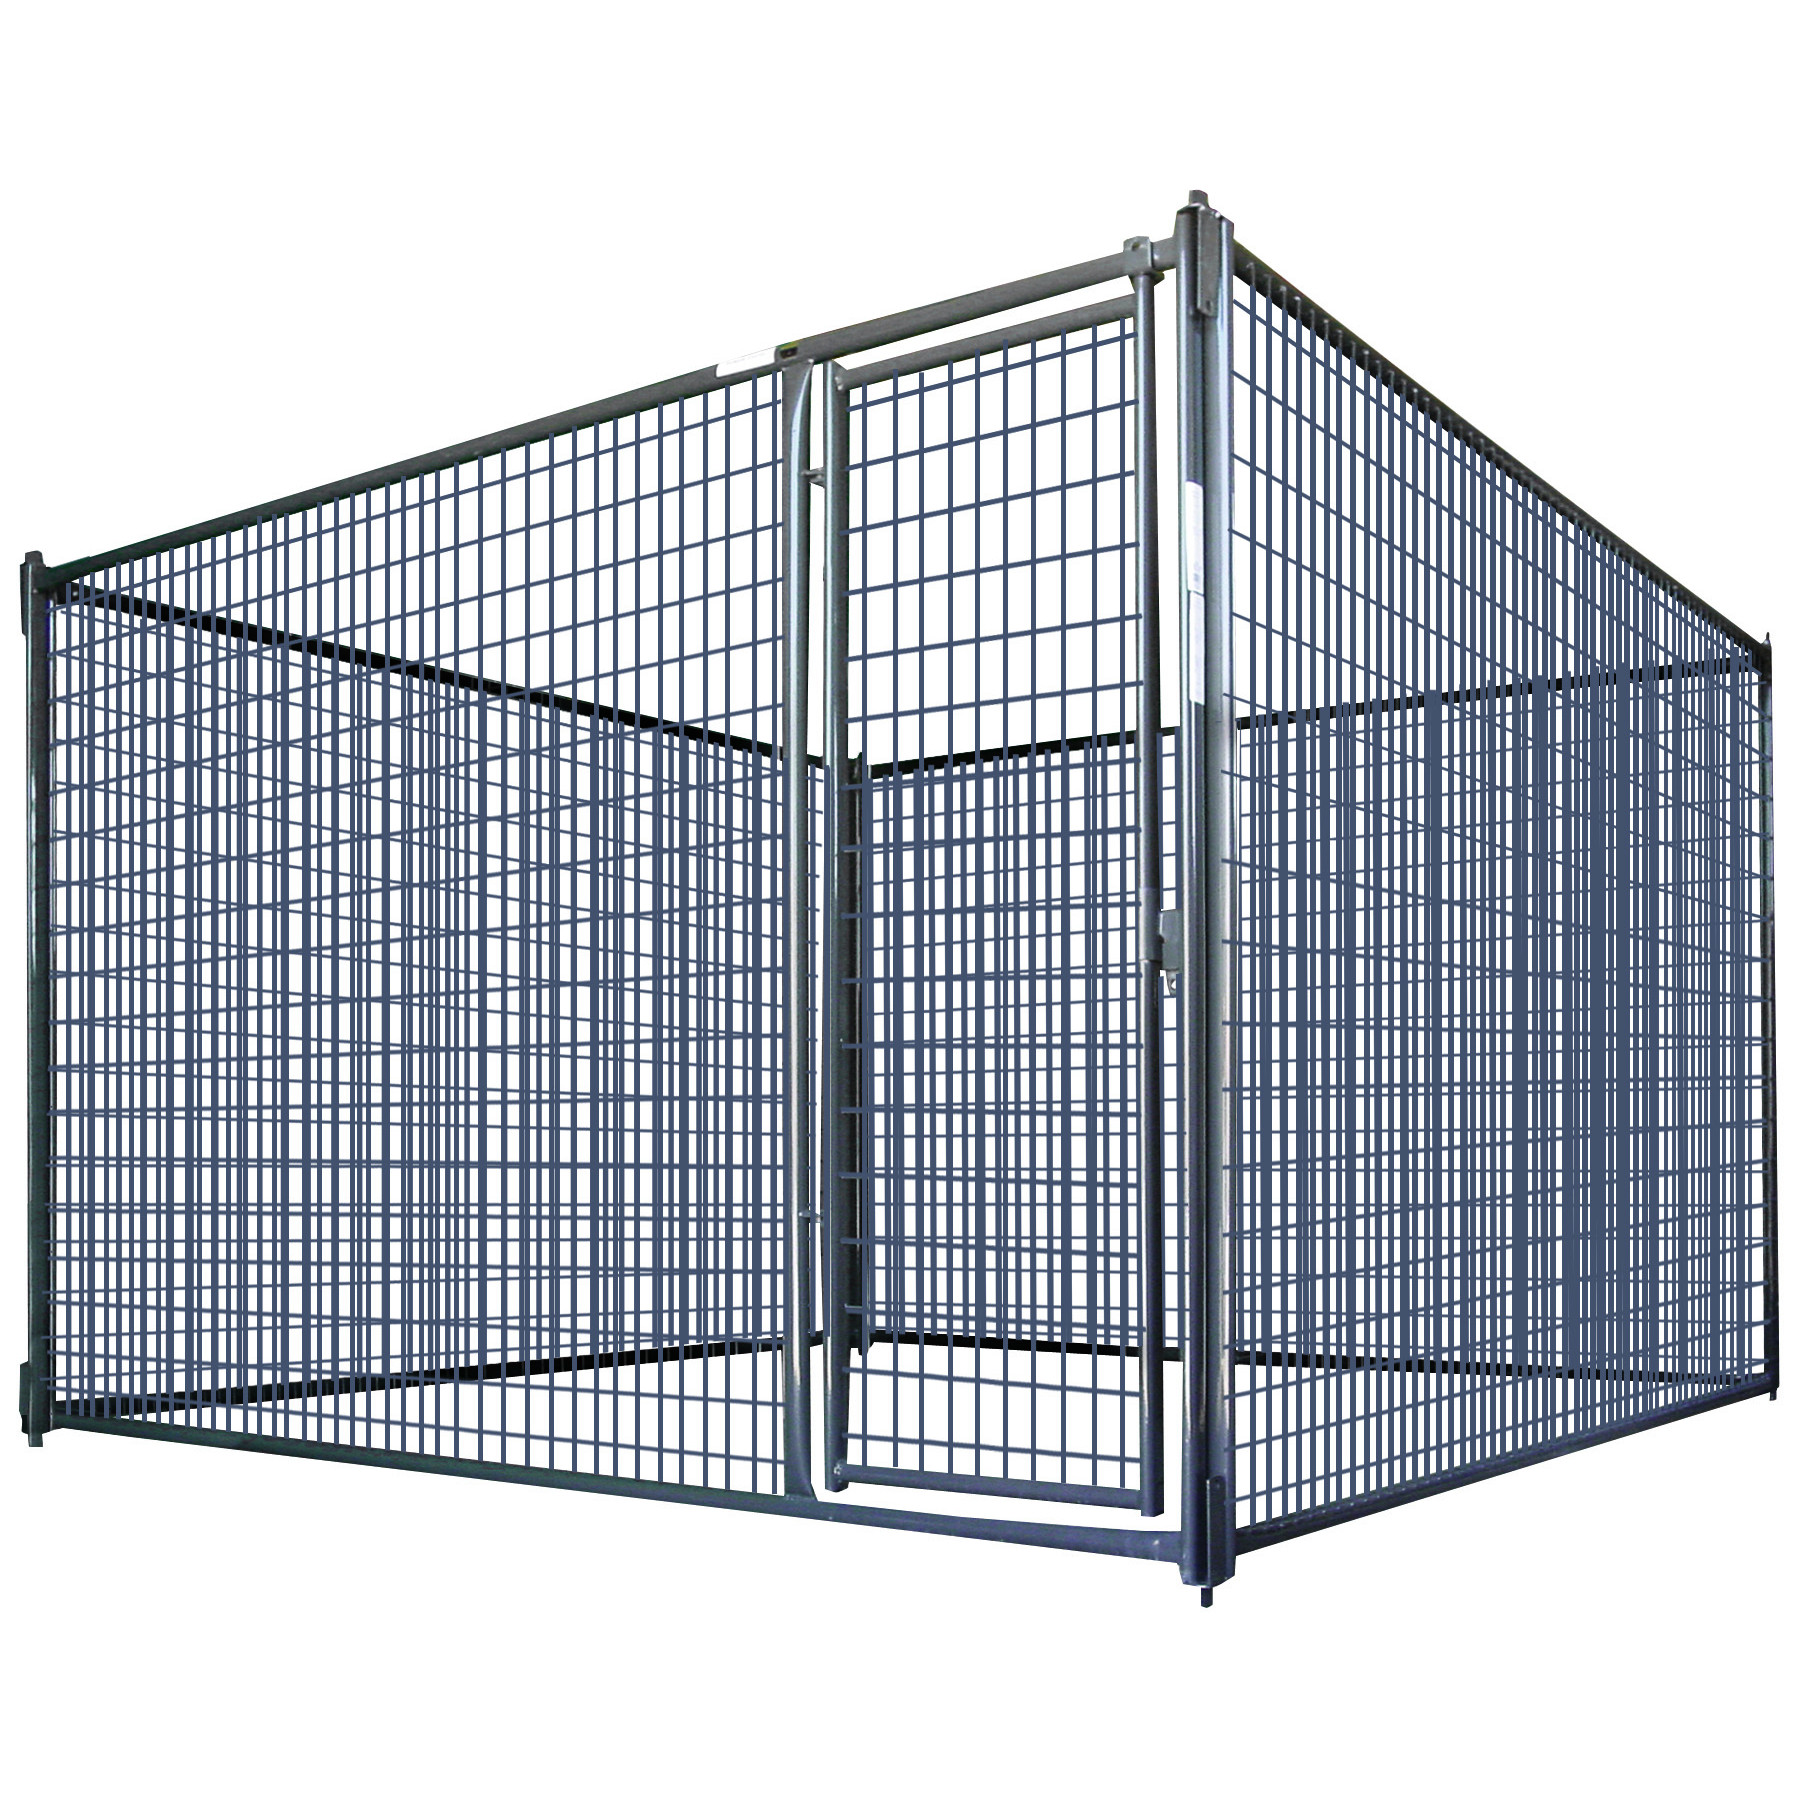 10x10 dog pen tractor supply